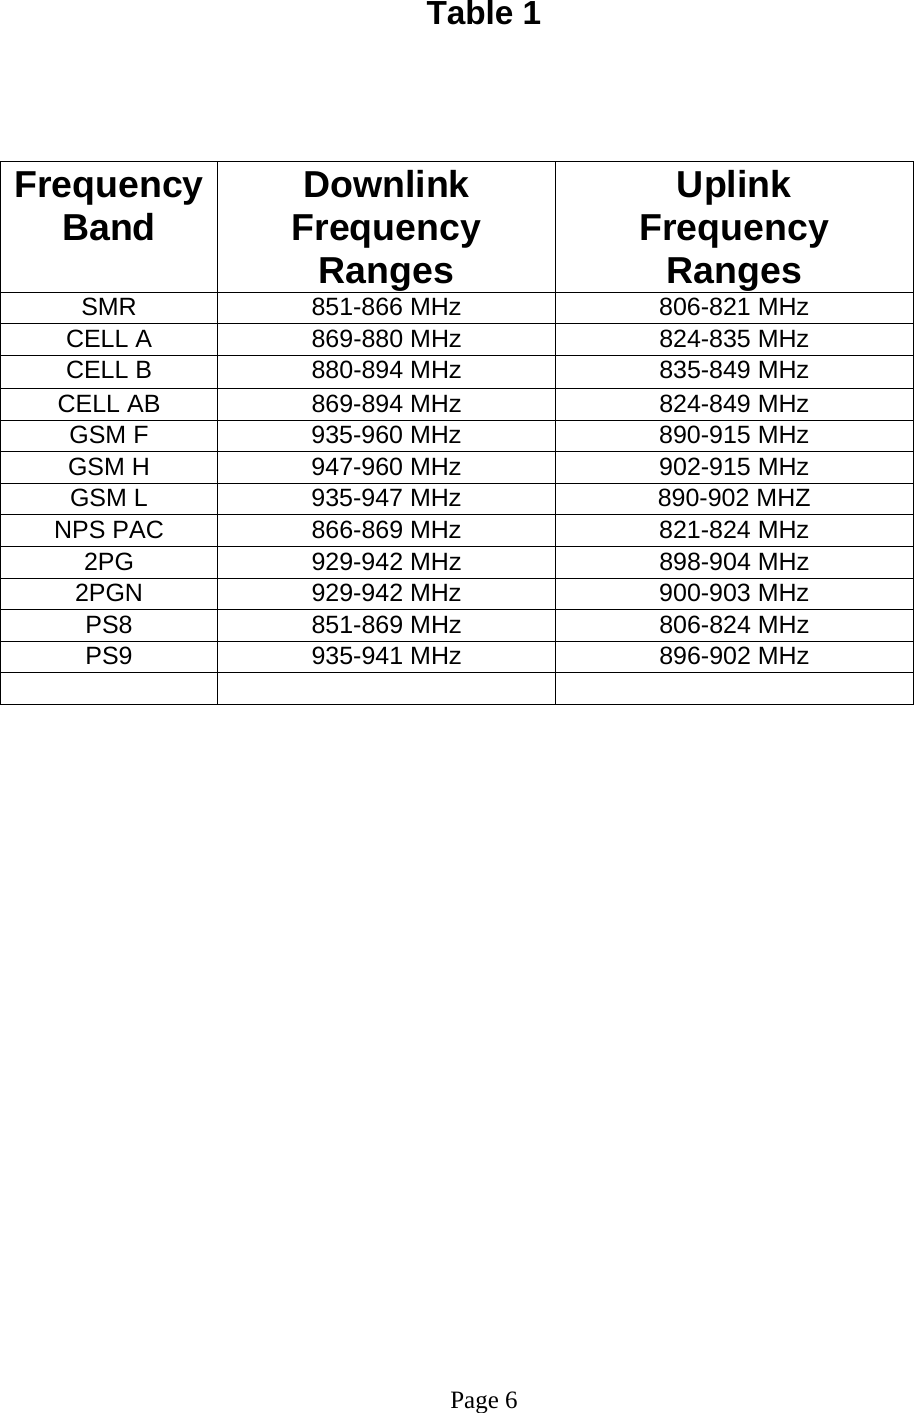   Table 1    Frequency Band  Downlink Frequency Ranges  Uplink    Frequency Ranges  SMR  851-866 MHz  806-821 MHz CELL A  869-880 MHz  824-835 MHz CELL B  880-894 MHz  835-849 MHz CELL AB  869-894 MHz  824-849 MHz GSM F  935-960 MHz  890-915 MHz GSM H  947-960 MHz  902-915 MHz GSM L  935-947 MHz  890-902 MHZ NPS PAC  866-869 MHz  821-824 MHz 2PG  929-942 MHz  898-904 MHz 2PGN  929-942 MHz  900-903 MHz PS8  851-869 MHz  806-824 MHz PS9  935-941 MHz  896-902 MHz                       Page 6 